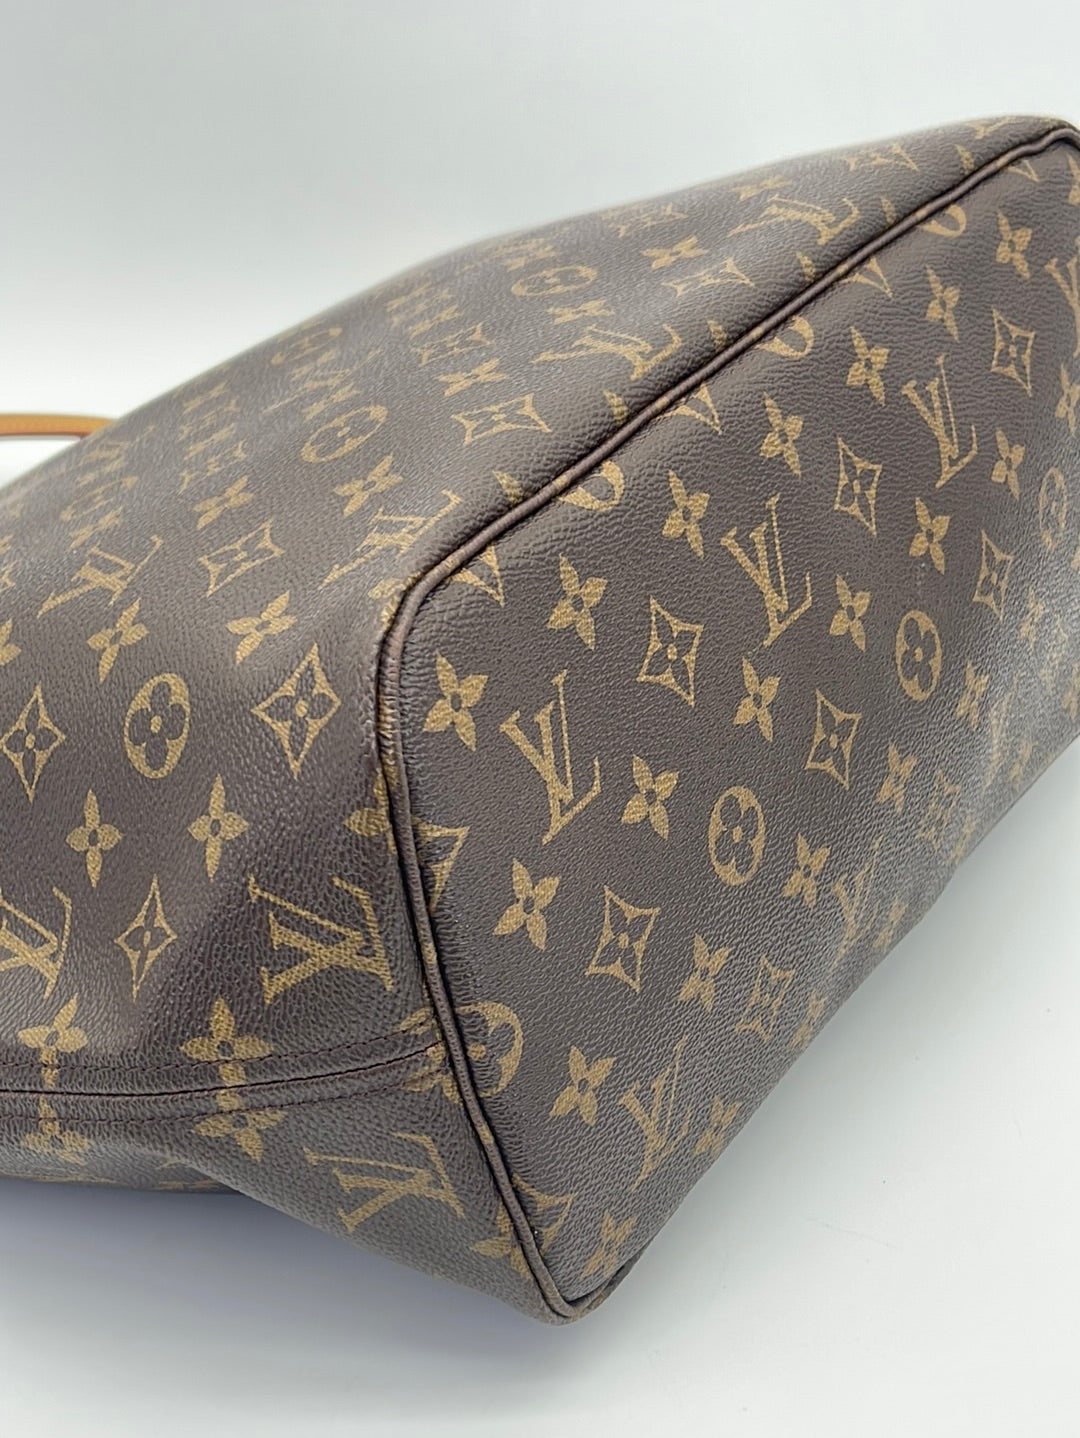 Buy Free Shipping [Used] LOUIS VUITTON Tote Bag Neverfull MM Monogram  Pivoine M41178 from Japan - Buy authentic Plus exclusive items from Japan